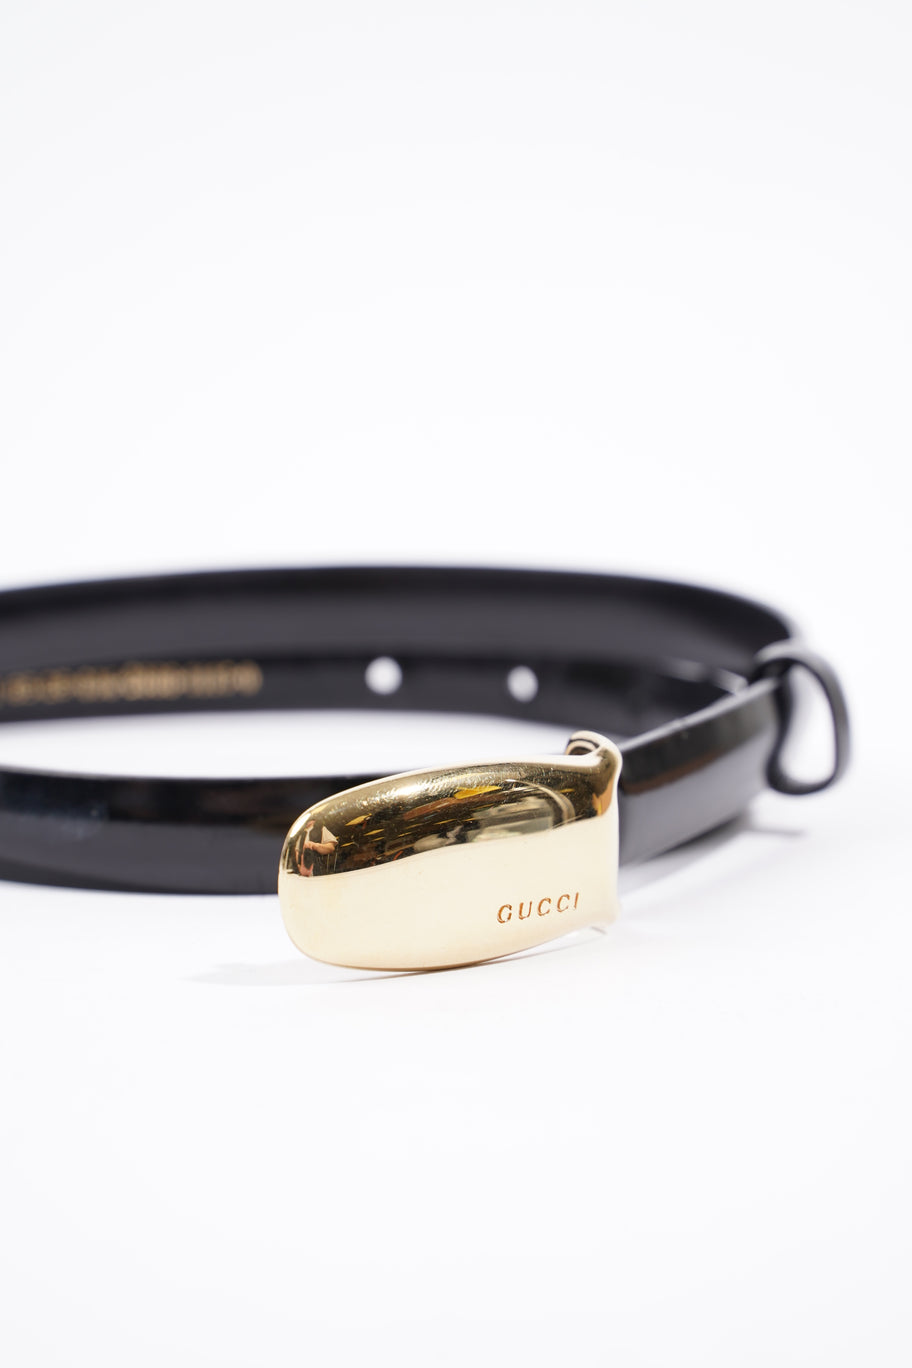 Oval Buckle Thin Belt Black / Gold Buckle Patent Leather 65cm 26